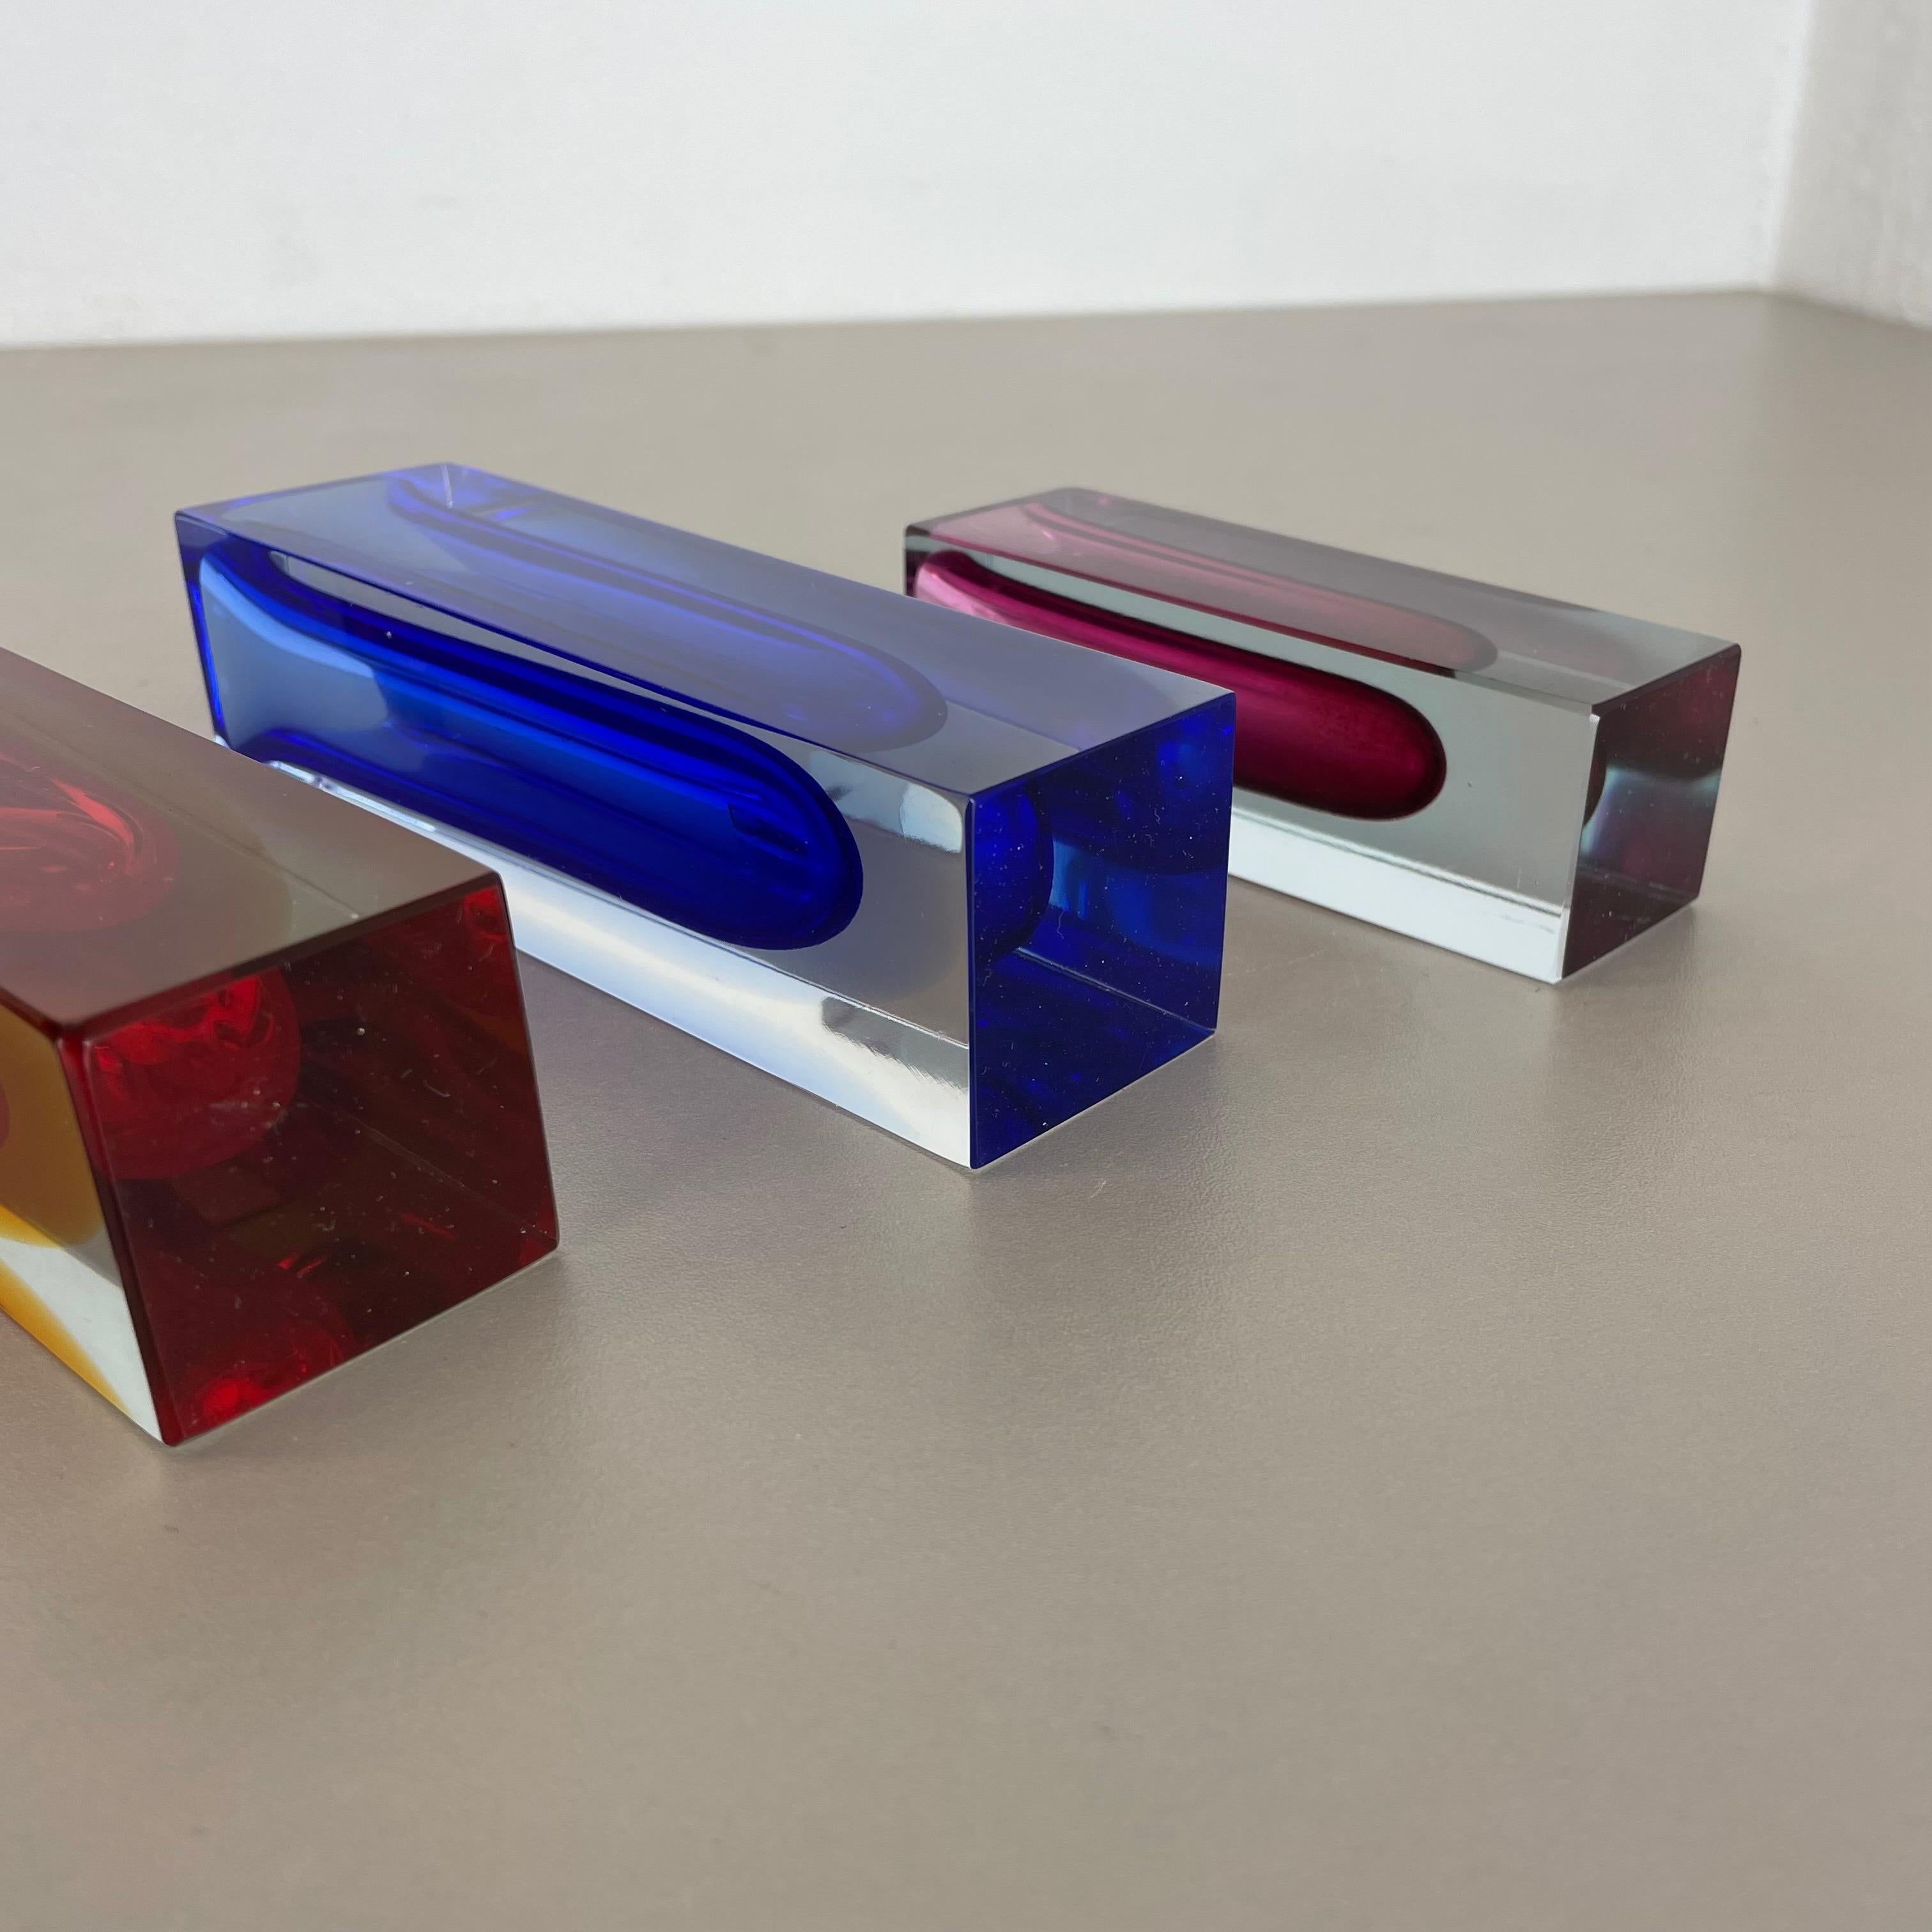 Rare Set of 3 Multicolor Faceted Murano Glass Sommerso Cube Vases, Italy, 1970s For Sale 6